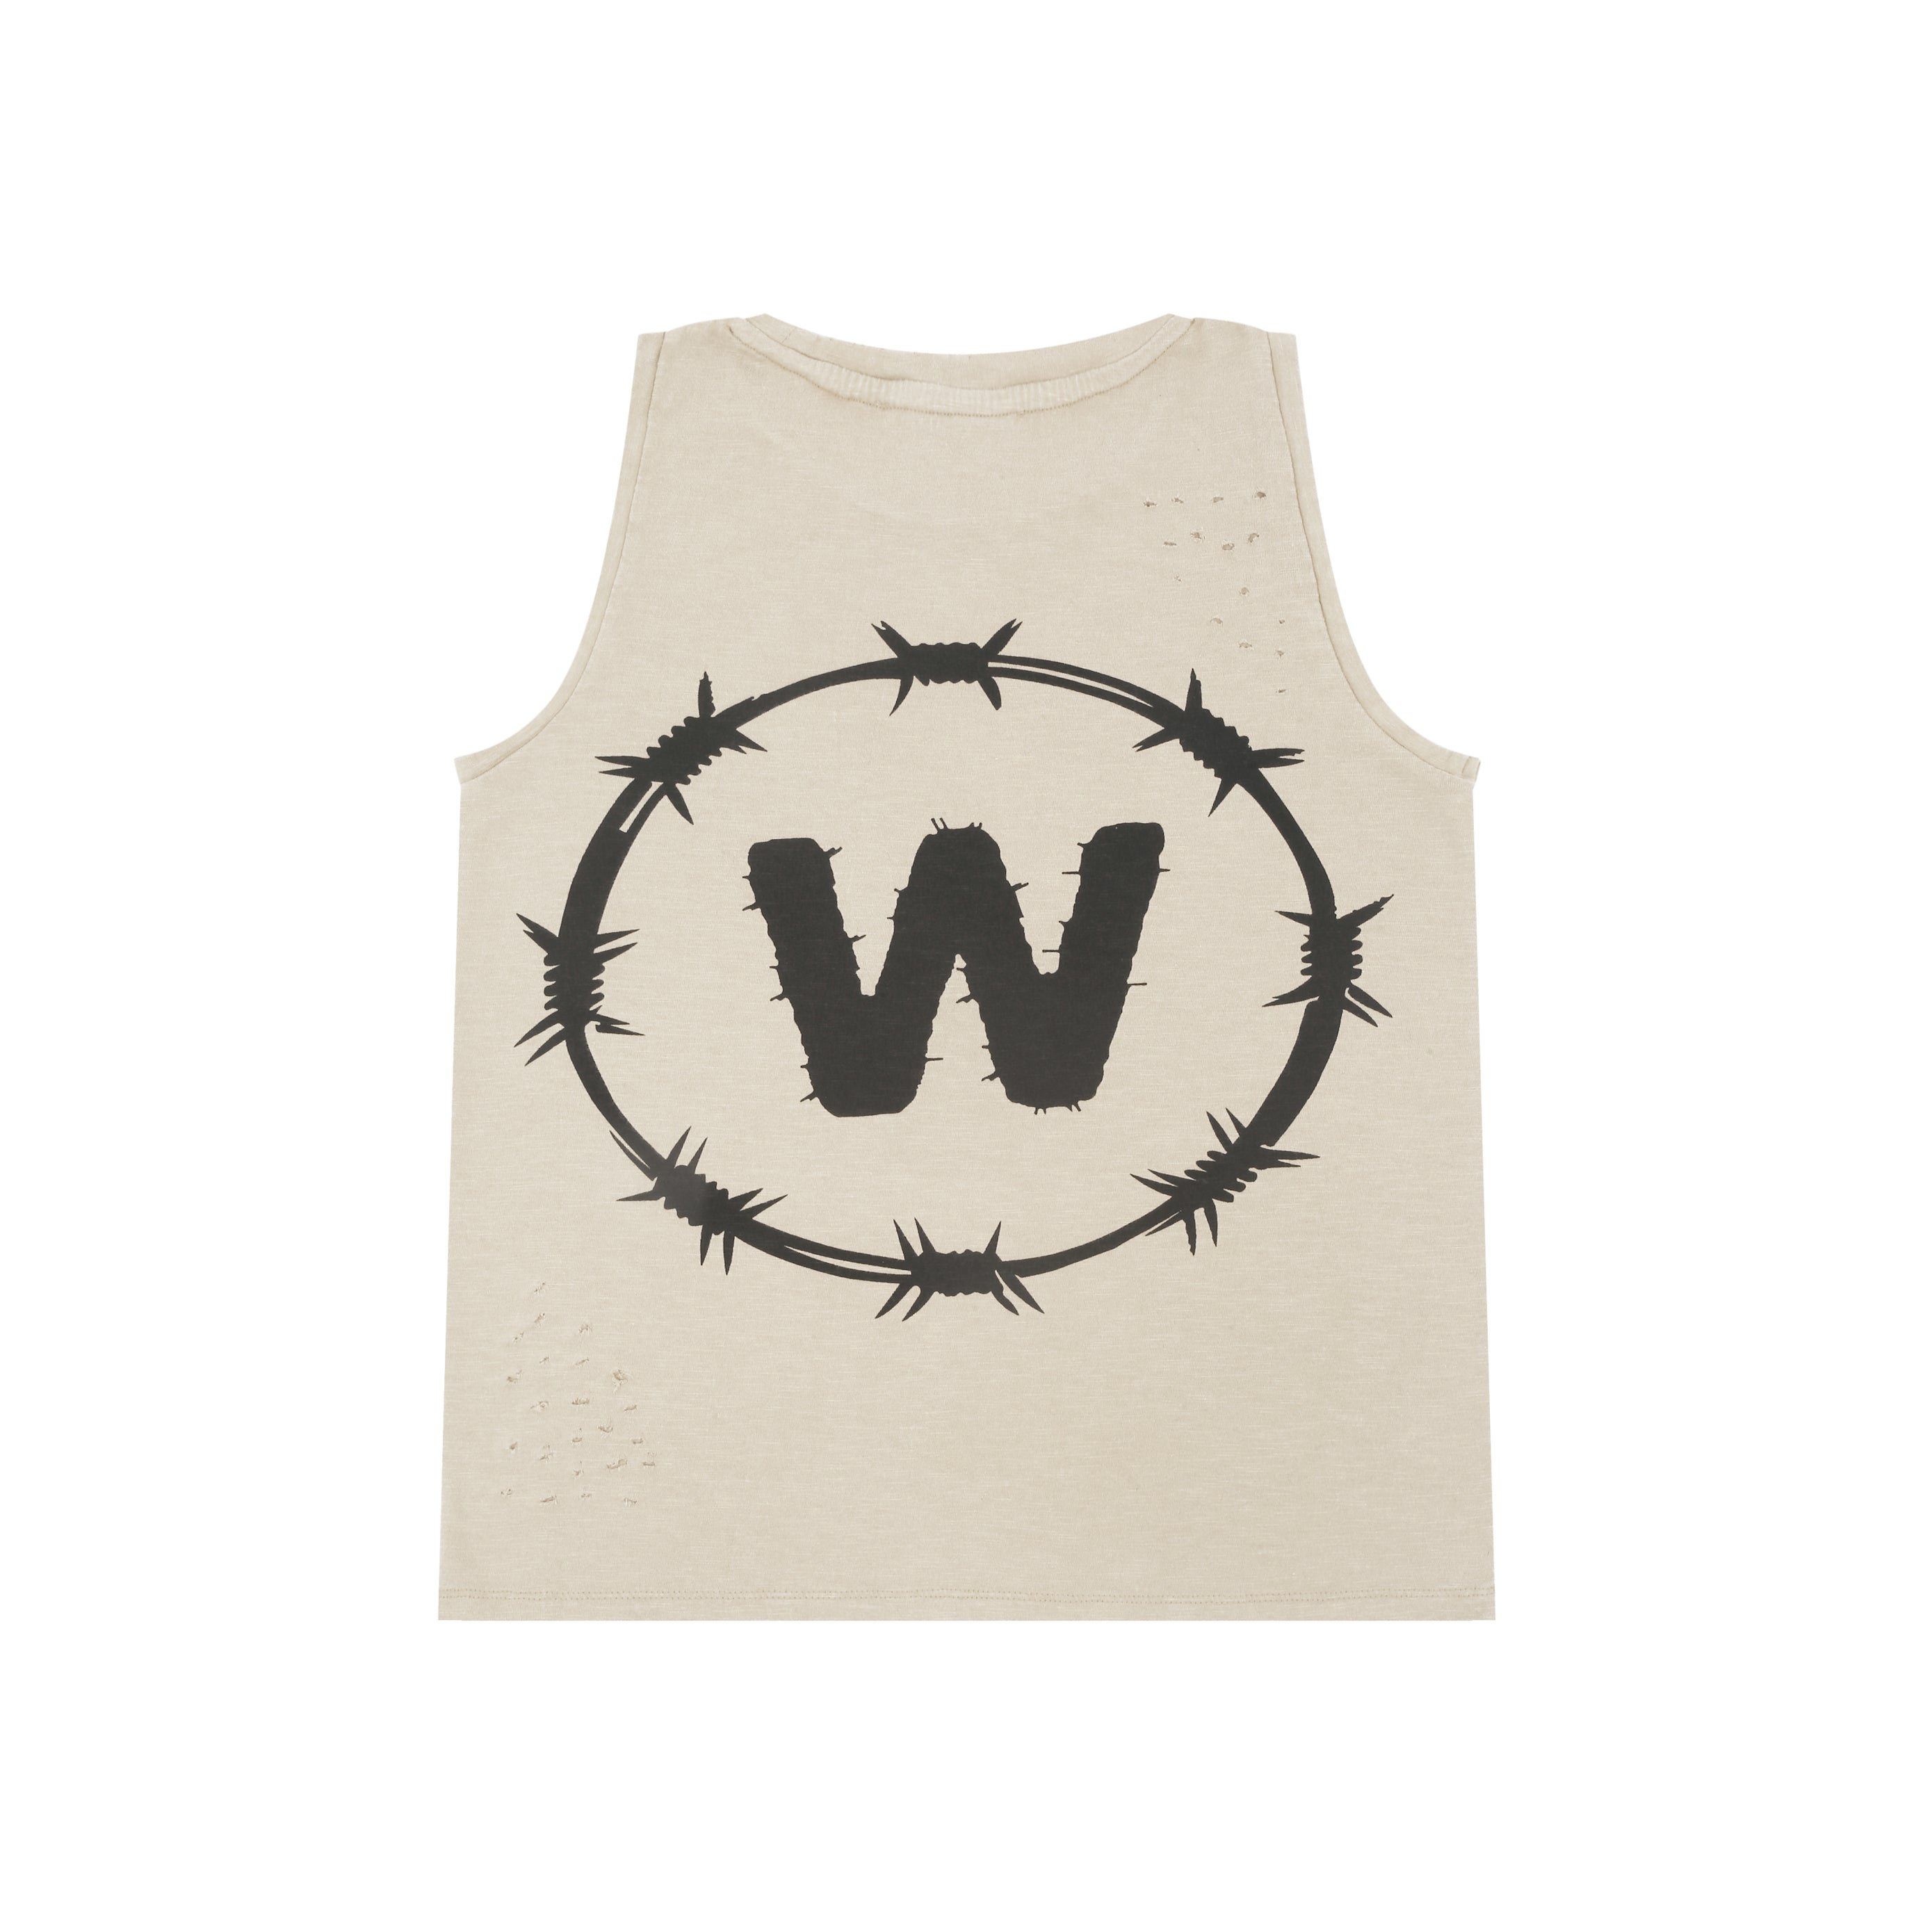 Ecru - Round Neck Tank Top "Gone With The Wind"